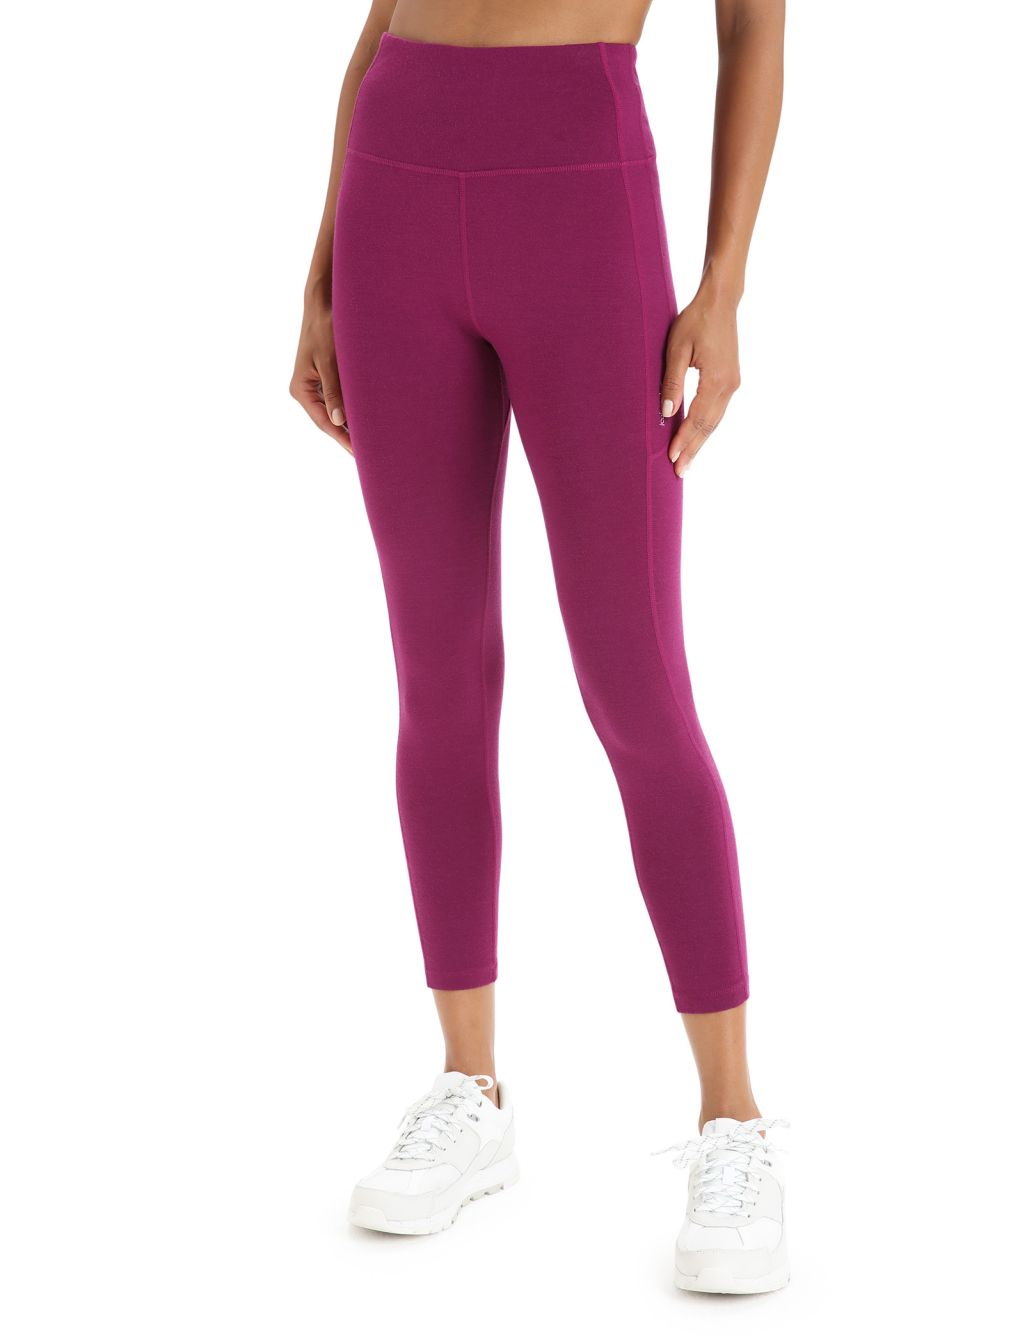 ICEBREAKER Wmns Fastray High Rise Tights, Go Berry velikost: M